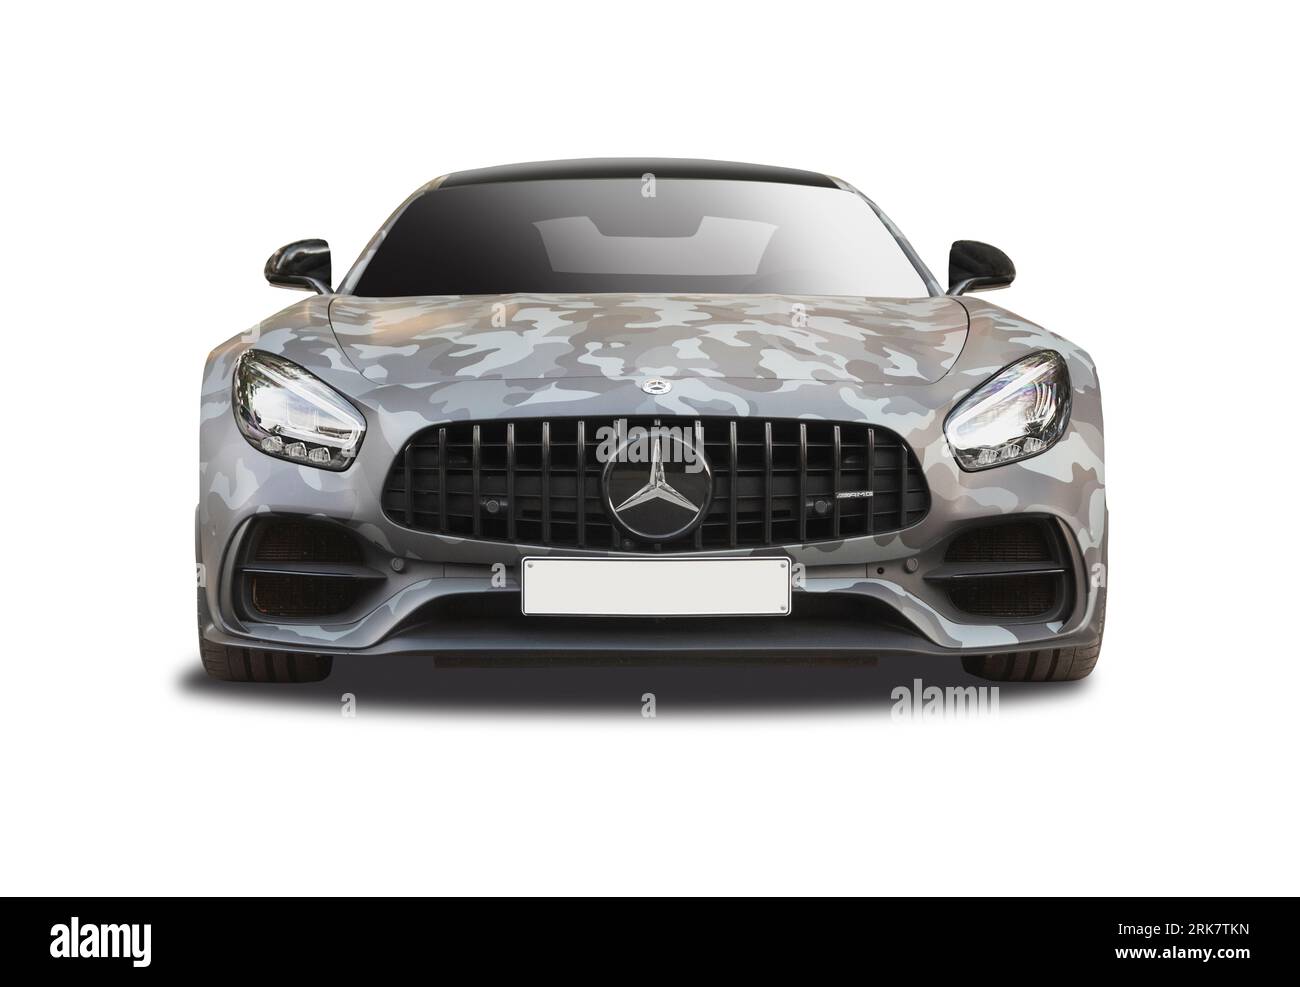 Mercedes-Benz AMG GT car front view isolated on white background Stock Photo